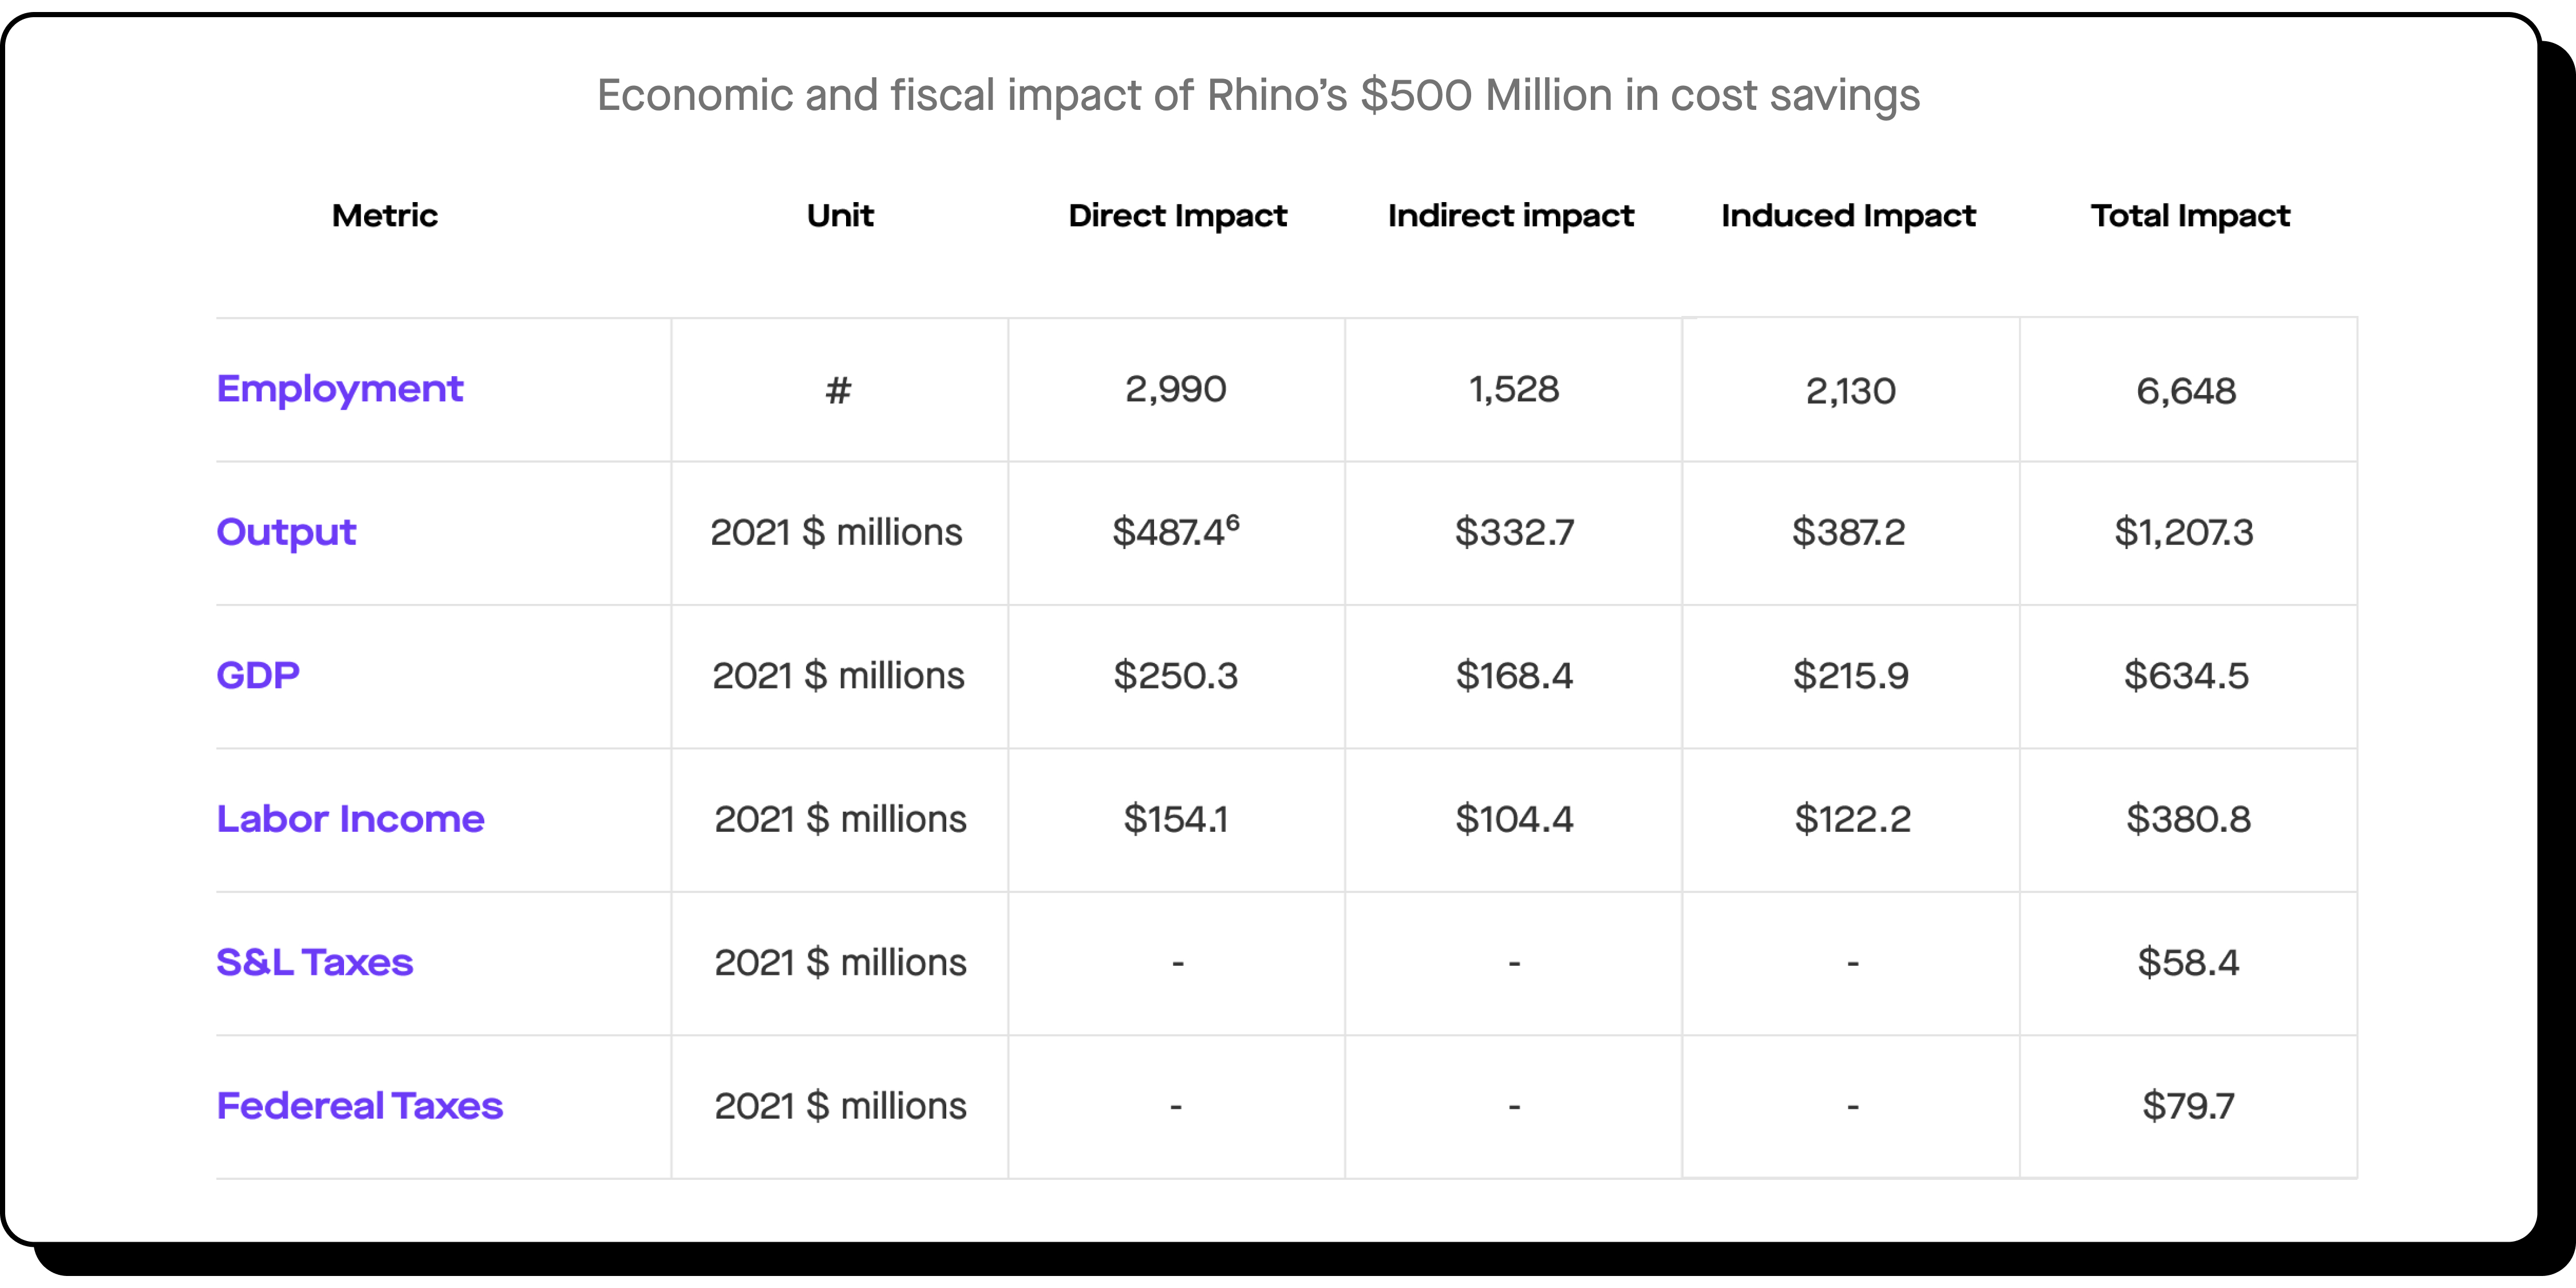 A graph that demonstrates the entire economic and fiscal impact of Rhino